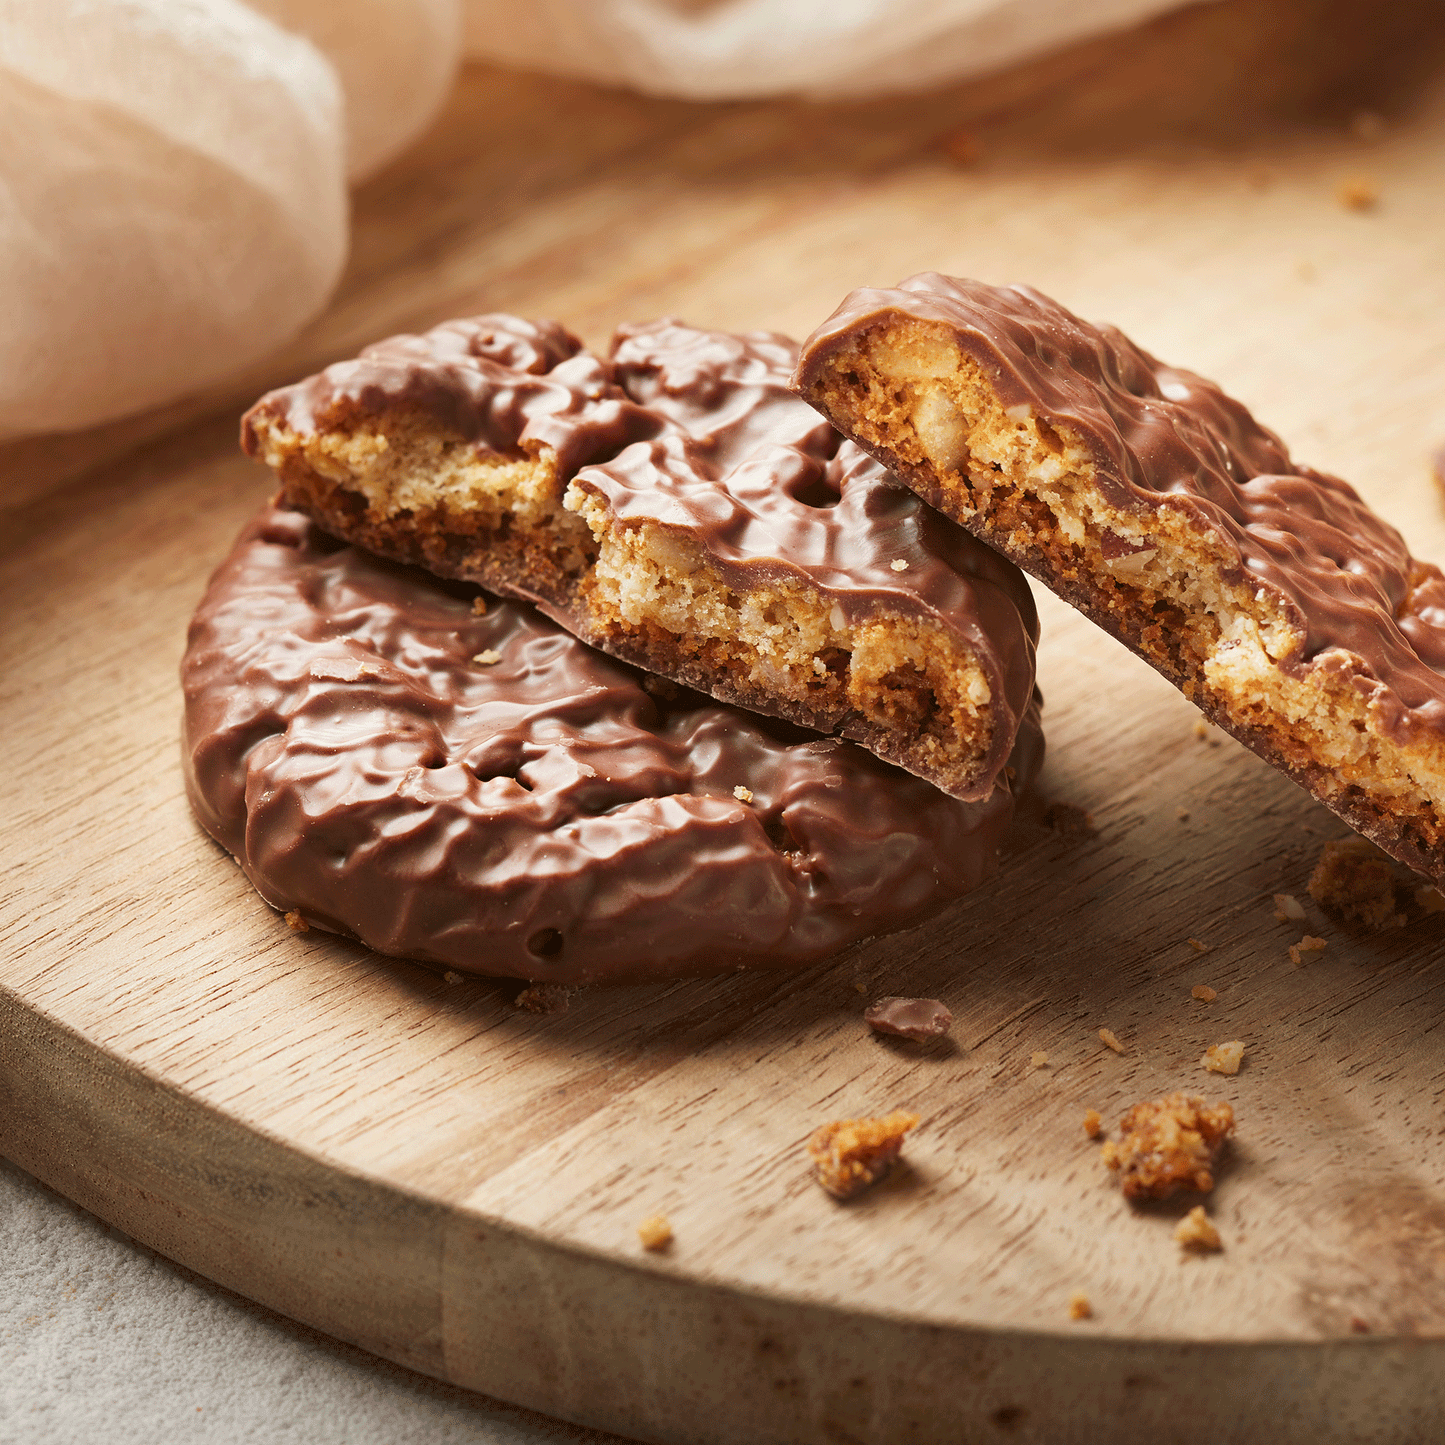 Chocolate Brazil Nut Biscuits